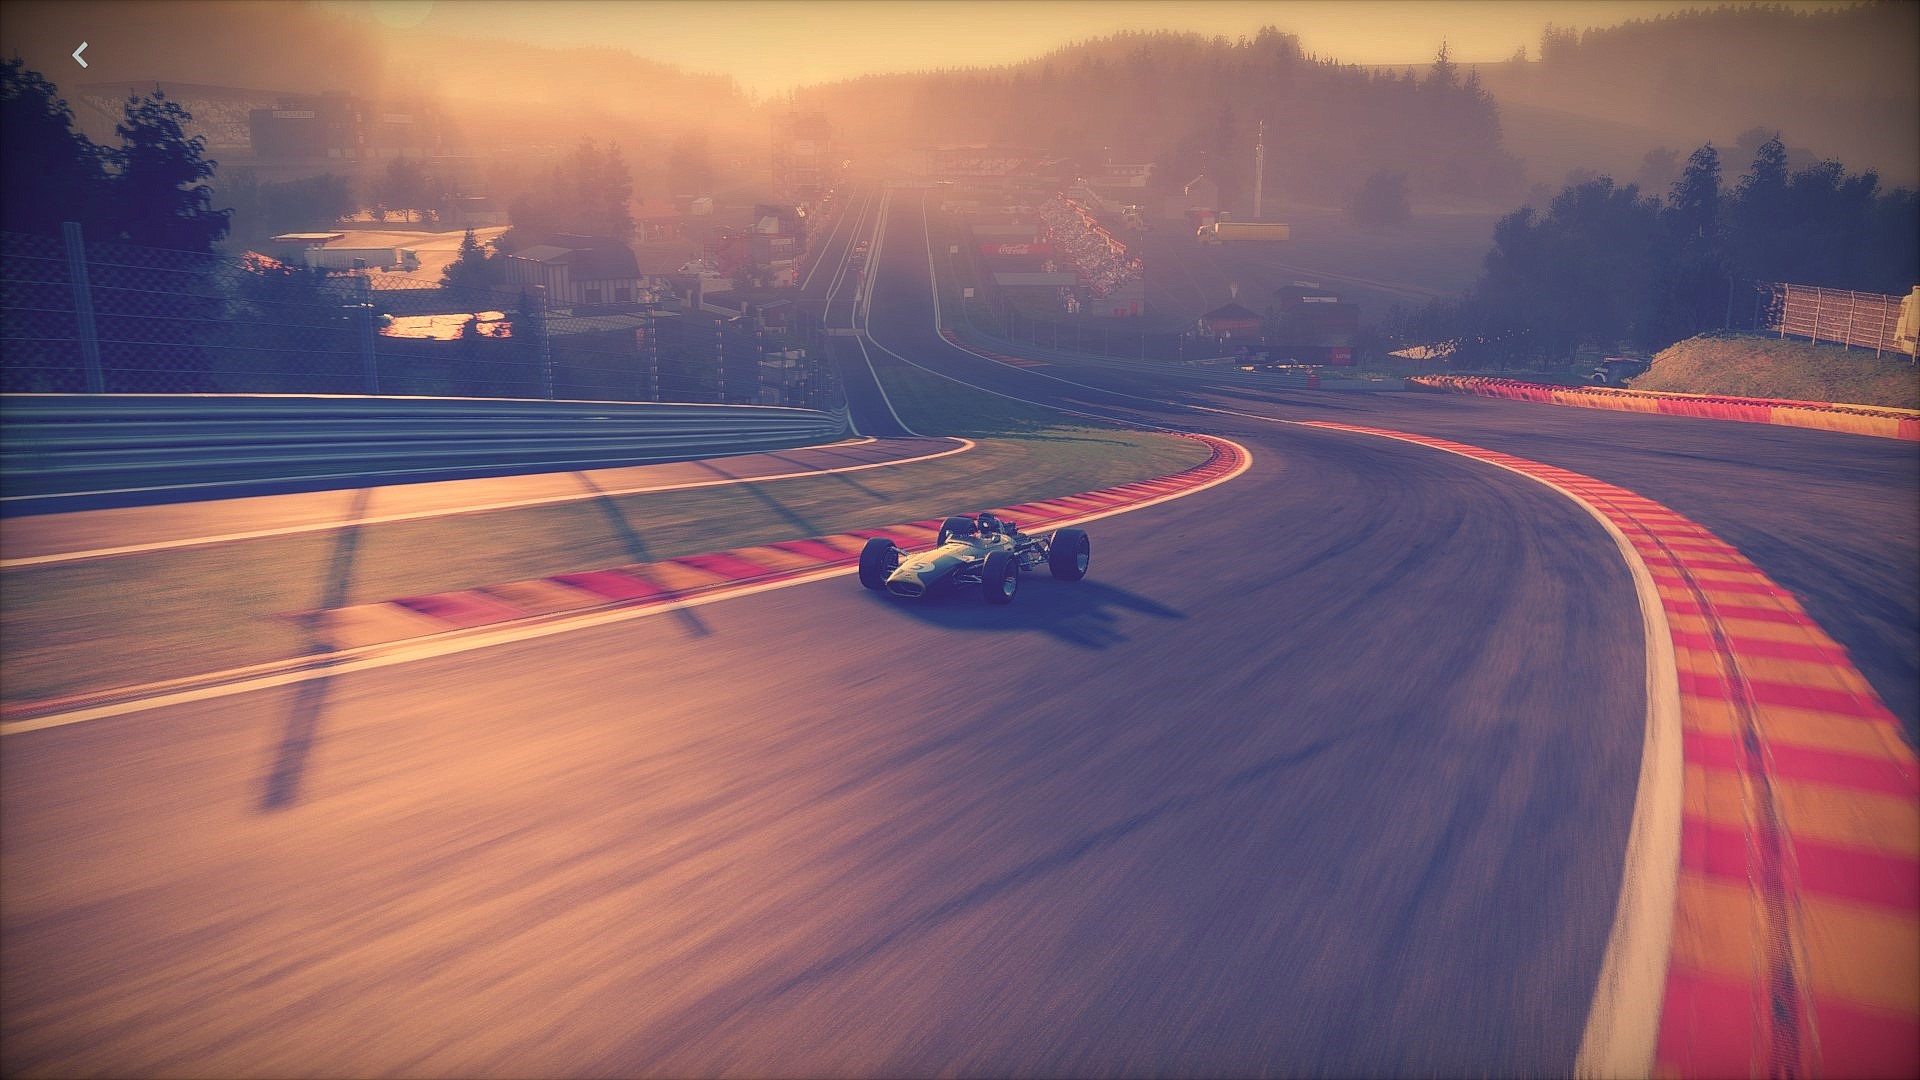 Spa Francorchamps, 1968 Lotus 49, Project cars Wallpaper